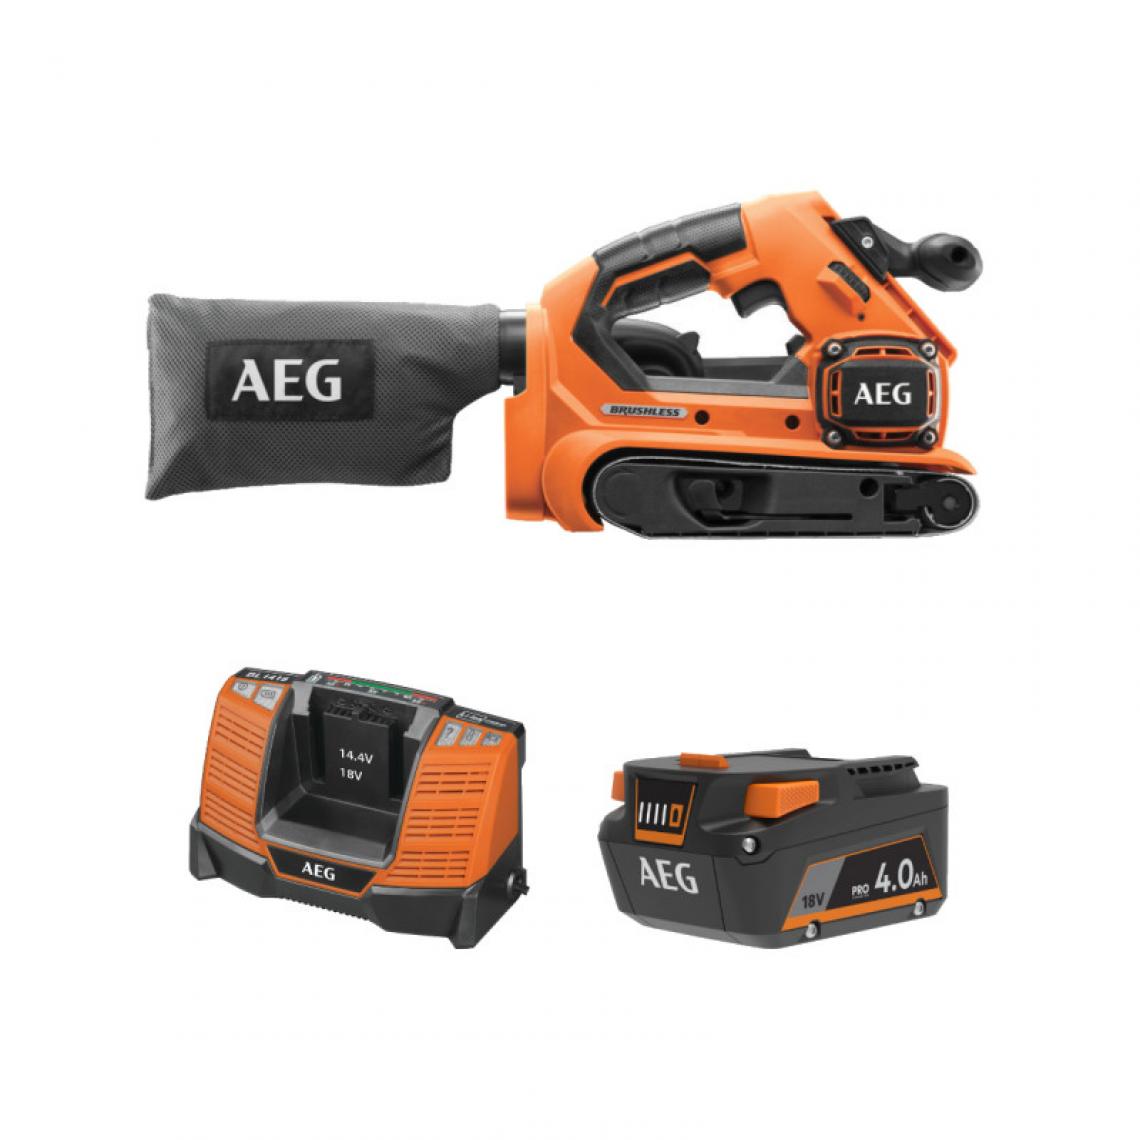 AEG - Pack AEG 18V - Ponceuse à bande Brushless 75mm - Batterie 4.0 Ah - Chargeur - Ponceuses excentriques